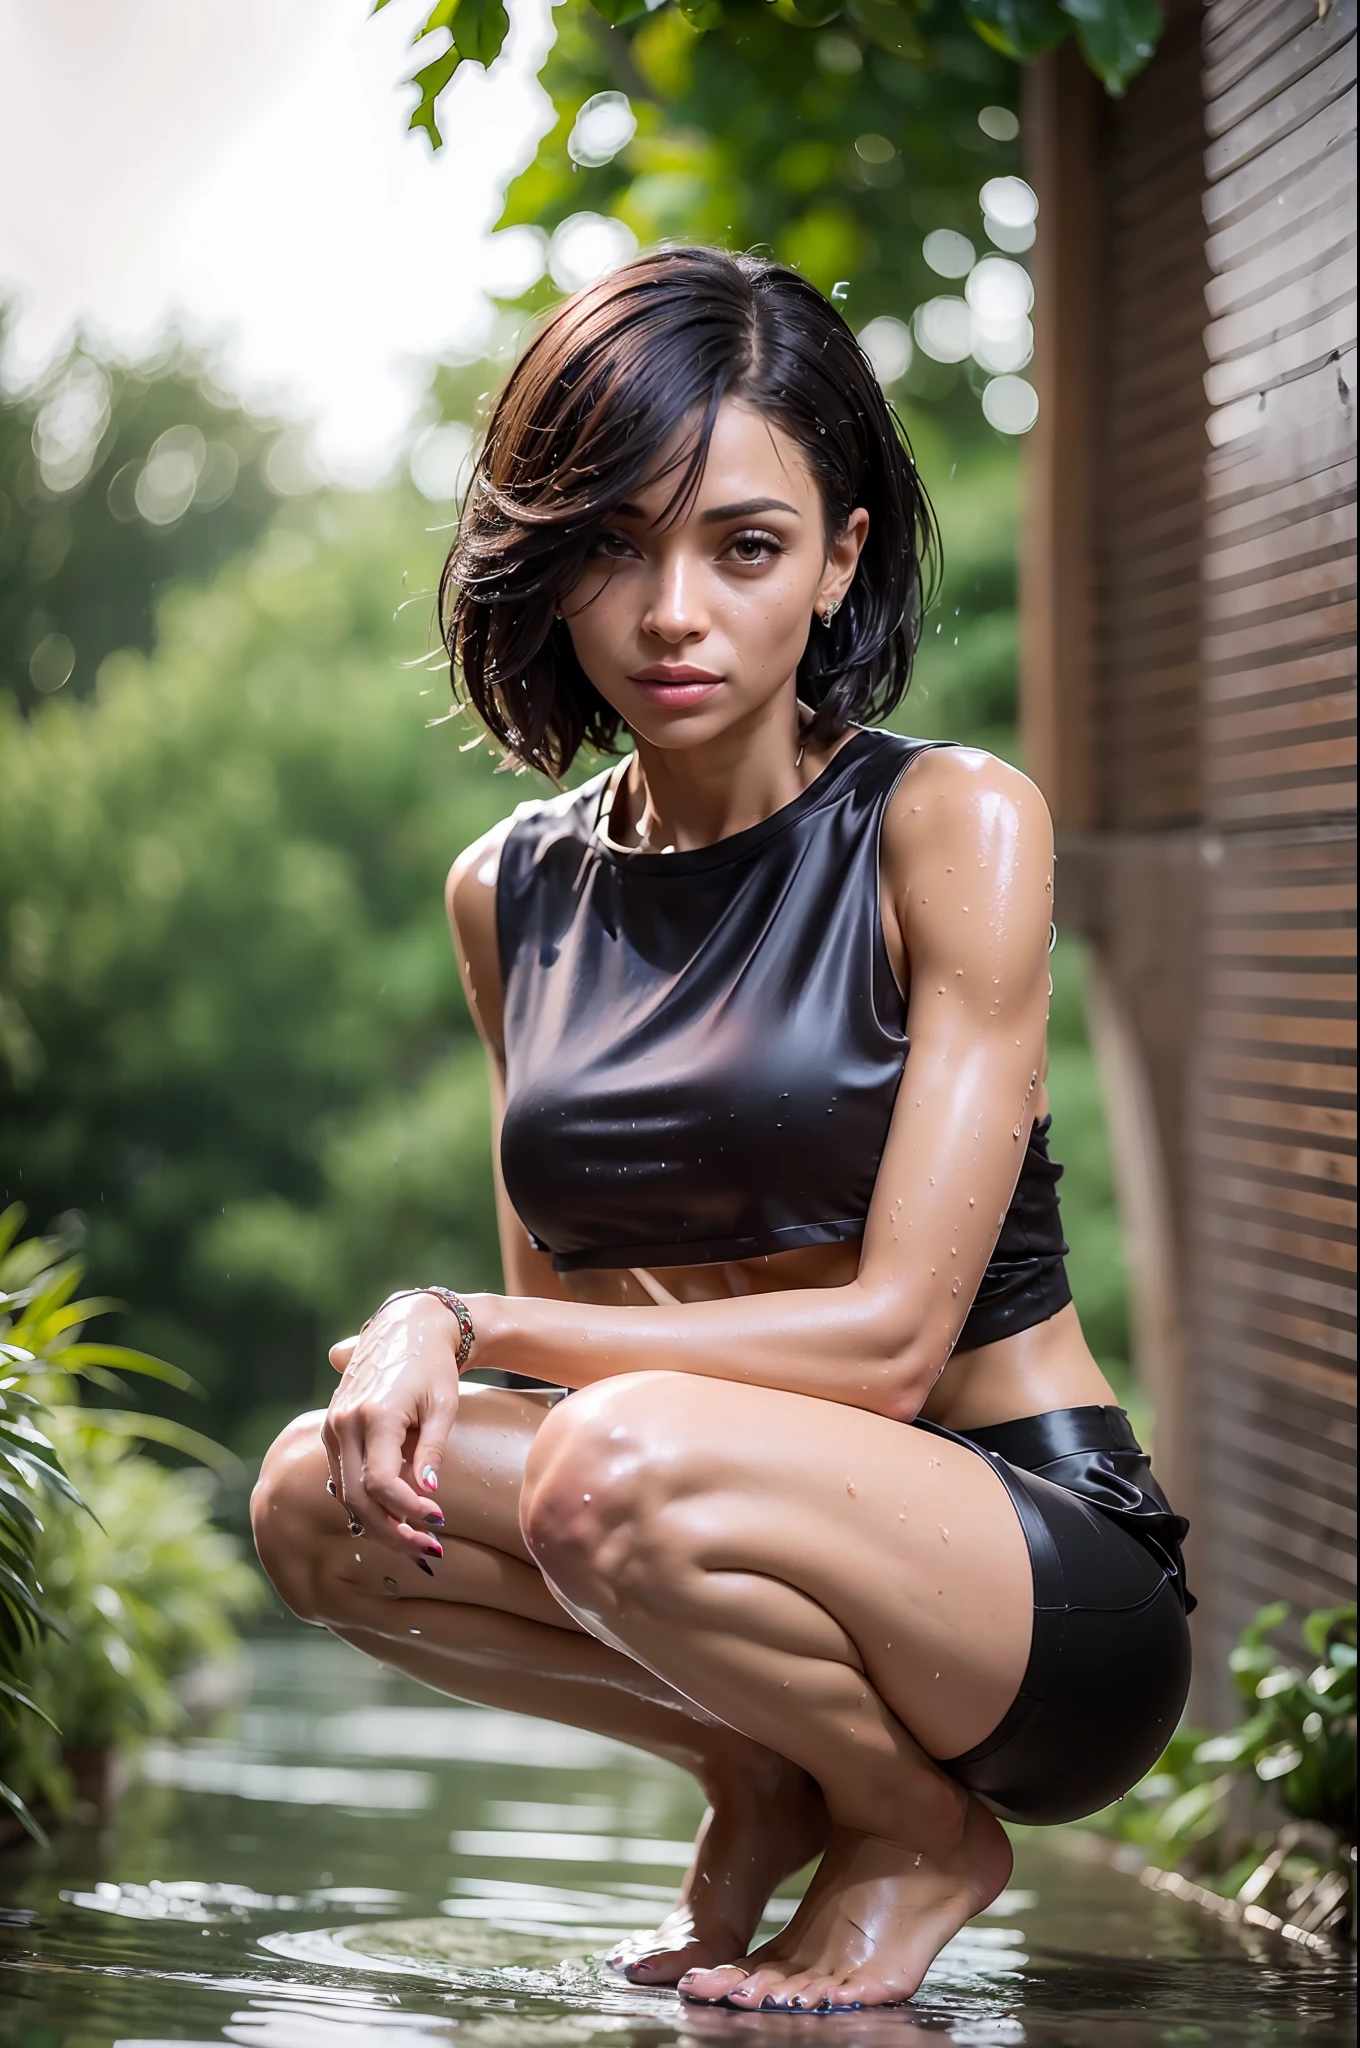 ((Tamara Taylor)), ((tall slender woman)), ((long legs)), ((hairstyle bob)), ((short black hair)), ((perfect figure)), It's evening and the woman is squatting in the garden in the pouring rain, (she's wearing a crop shirt:1.6), (she's wearing a silk skirt:1.4), (her clothes are very wet, 1.5), (((small_breasts))), (photorealistic:1.2) (best quality) (intricate details) (8K) (High Poly) (Raytracing) (Cinema Lighting) (Sharp Focus) (Detailed Face:1.3),  realistic skin textures, soft face, beautiful natural skin, beautiful face, (beautiful natural skin), suntanned skin, ((beautiful face)), seductive look, (perspective from the side), ((crisp buttocks)), ((cameltoe))